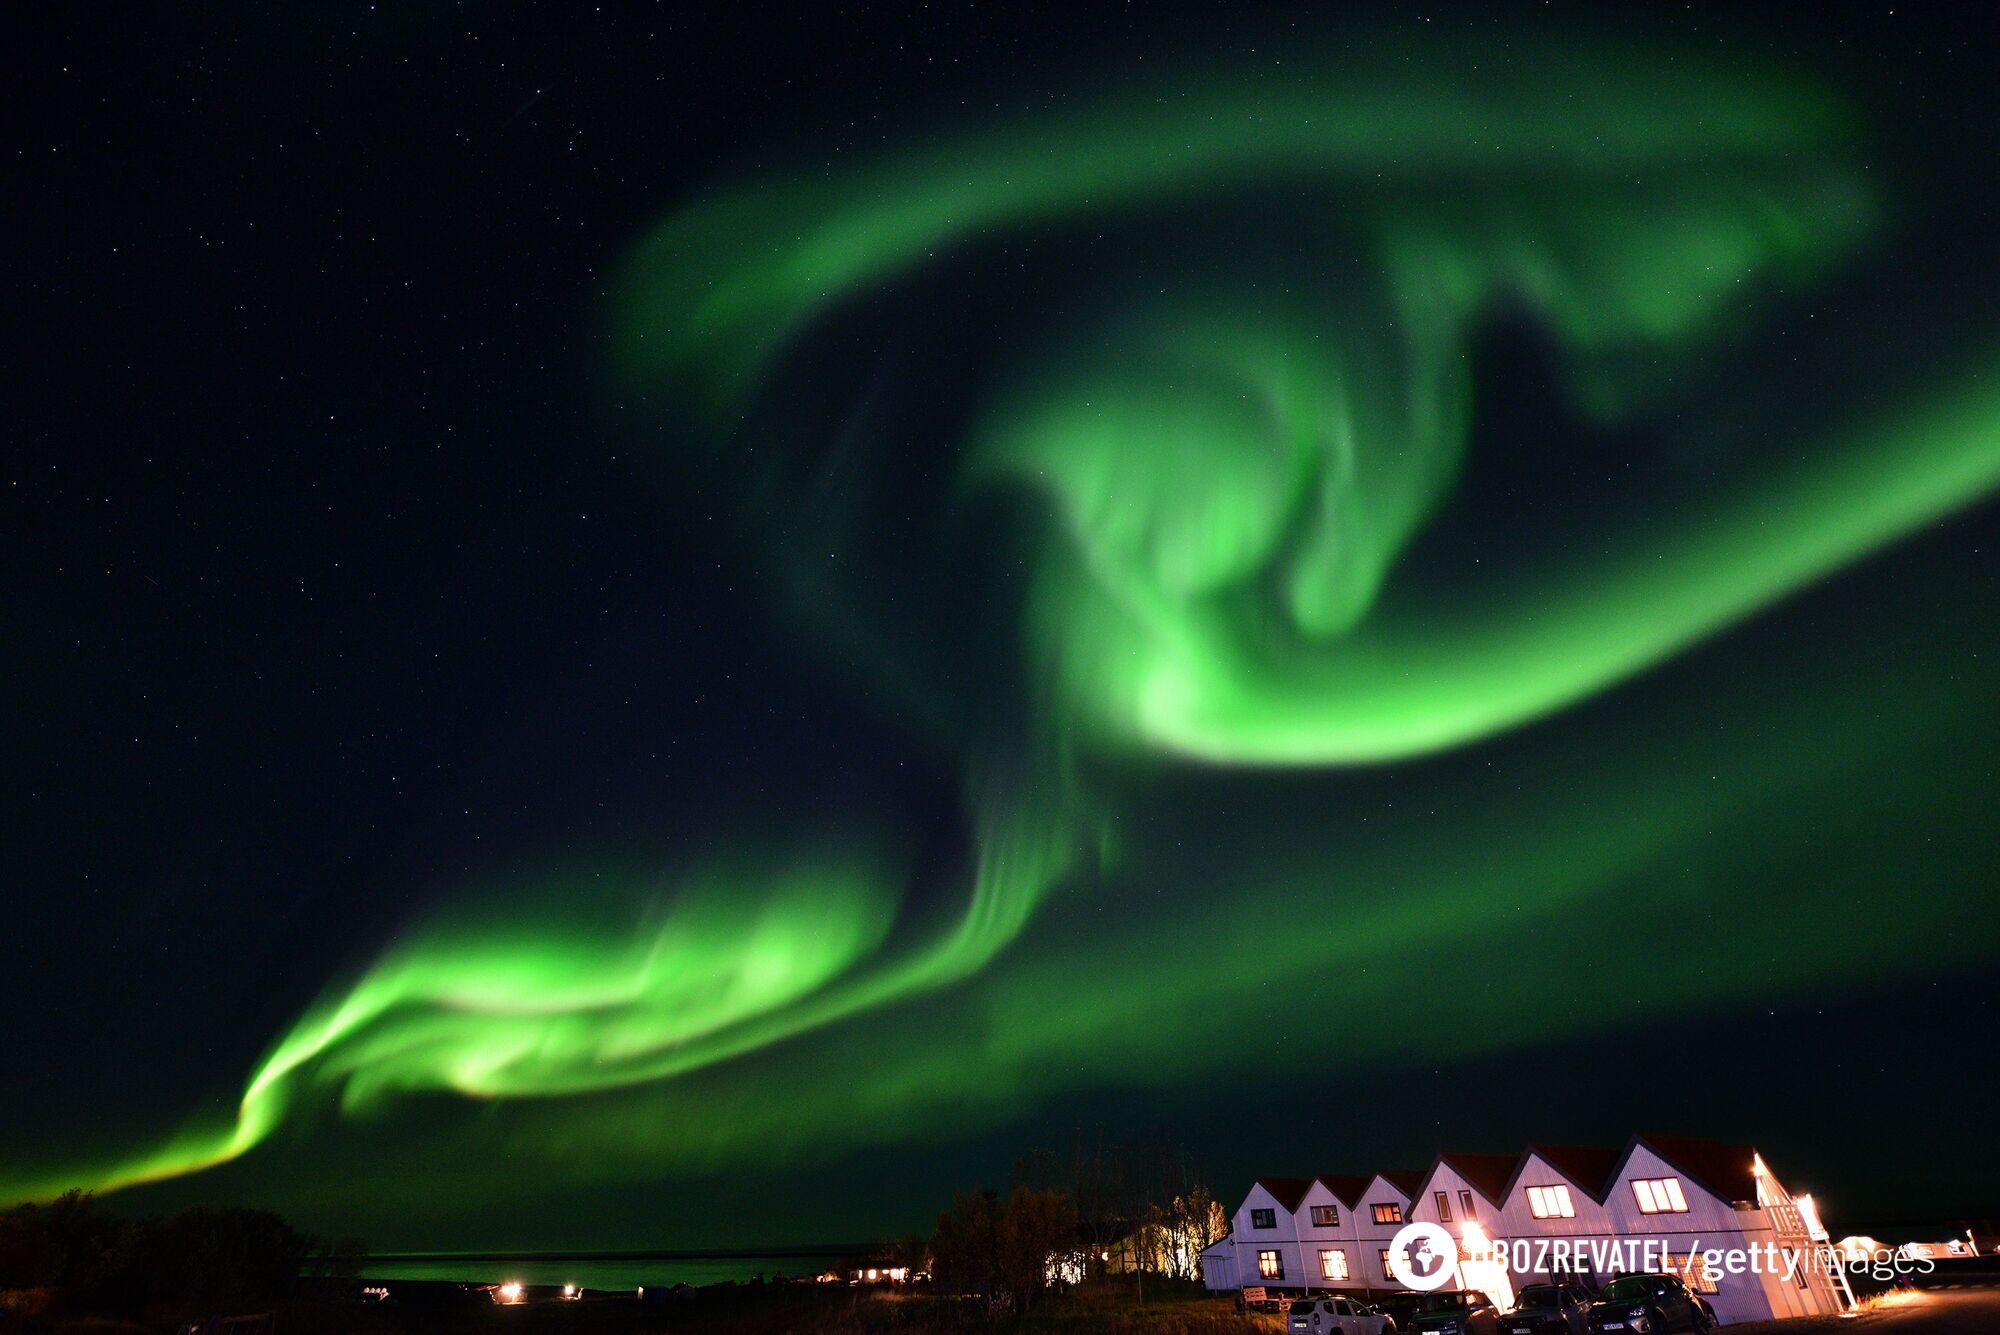 The northern lights can create the most bizarre patterns.